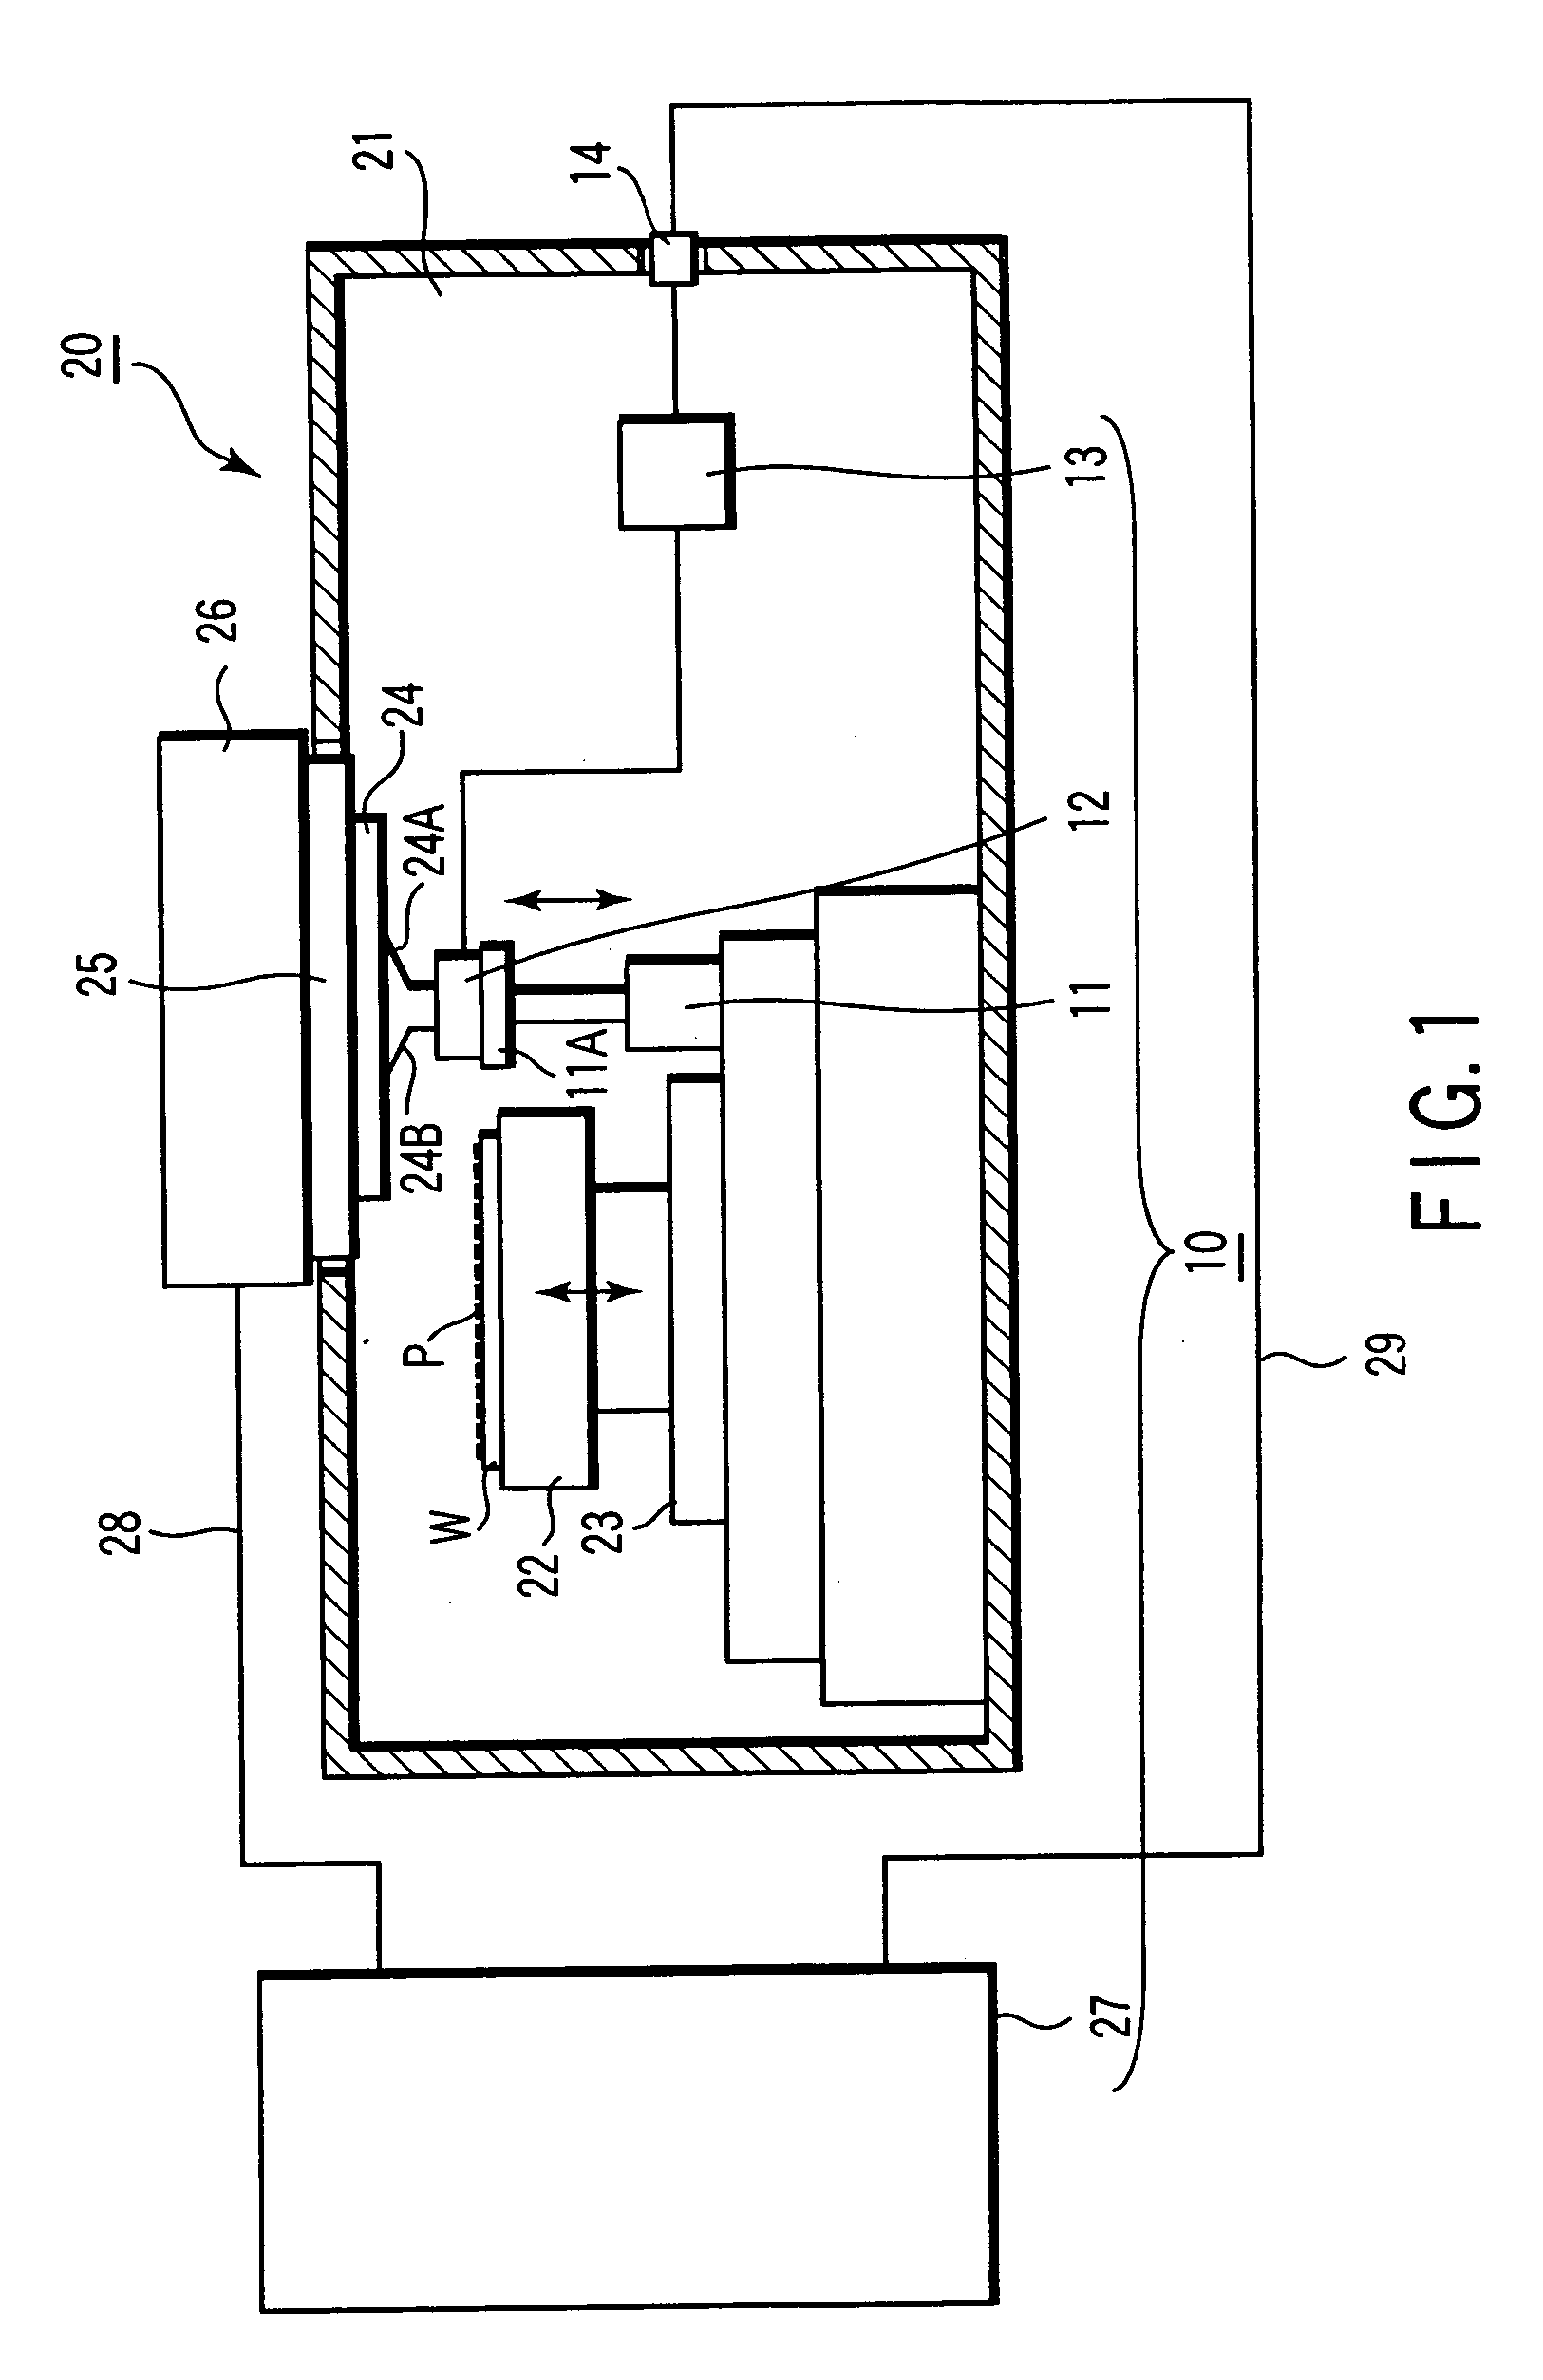 Signal detection contactor and signal calibration system